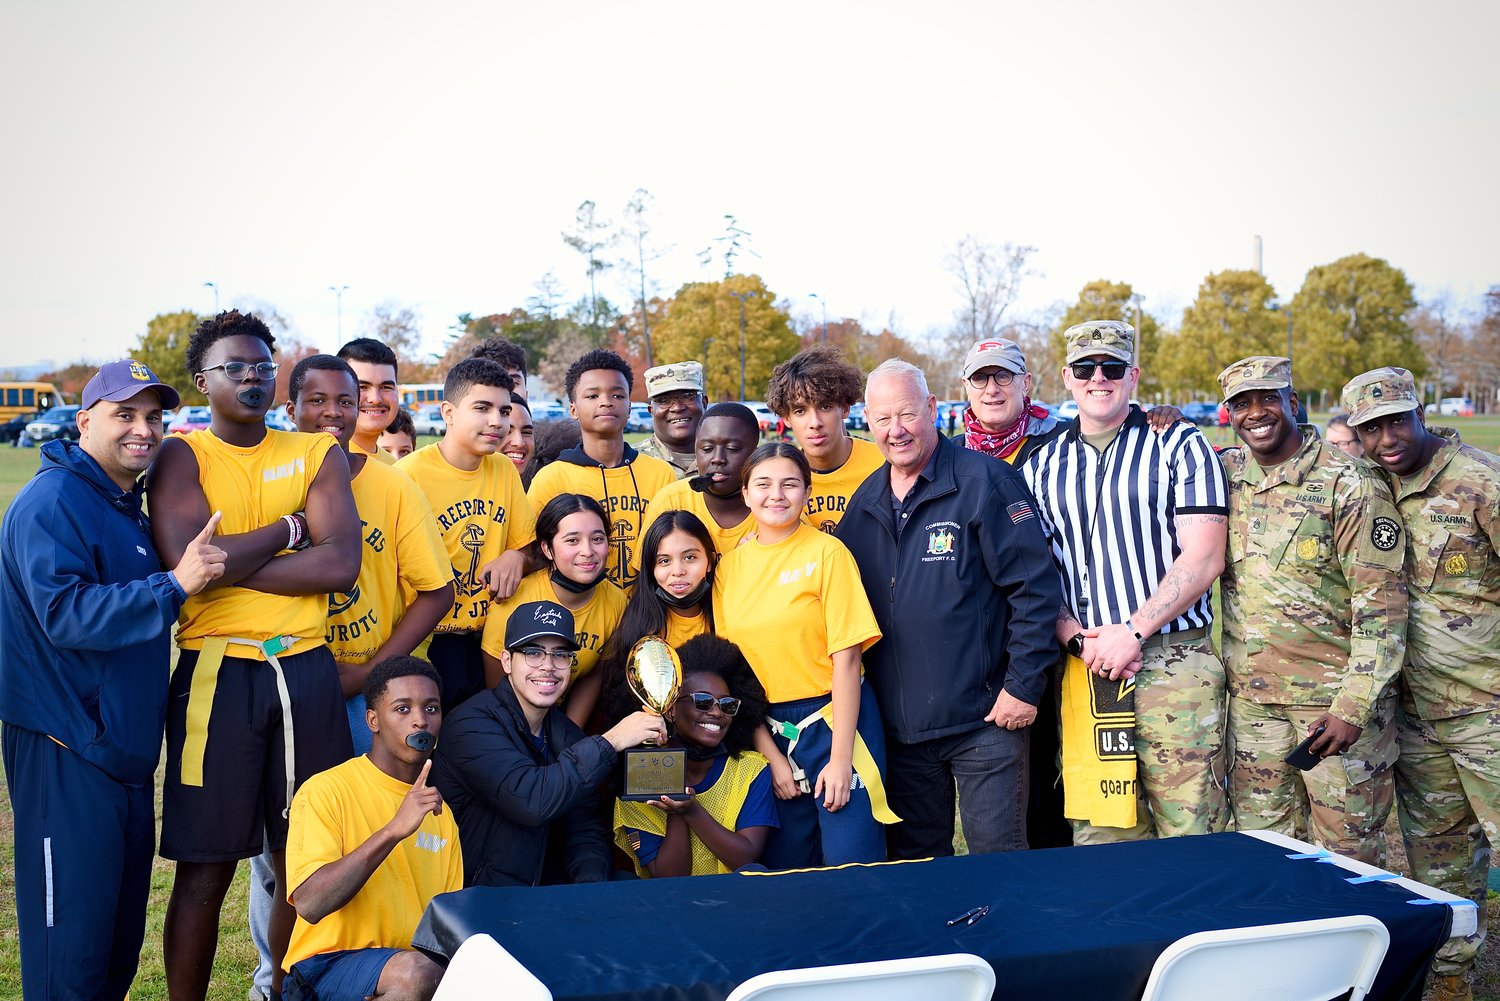 The Freeport JROTC team was joined by military and village officials after the game. Top row, from left:  Chief Lopez; Ethan Cairo; Korey Hillocks; Nick Quintanilla; Mike Rodriguez; Matthew Johnson;   Staff Sergeant Kabore; Alec Bastien; Reymon Gonzalez;  Mayor Robert Kennedy;  Major Don Moore;  Staff Sergeant Roberts; Staff Sergeant Joel Buckmire; Sergeant First Class Byrd. Middle row, from left:  Kimberly Diaz; Catherine Crespo; Kimberly Guatamala. Front row, from left: Michael Bunburry; Justin Moran; Jillian Neblett